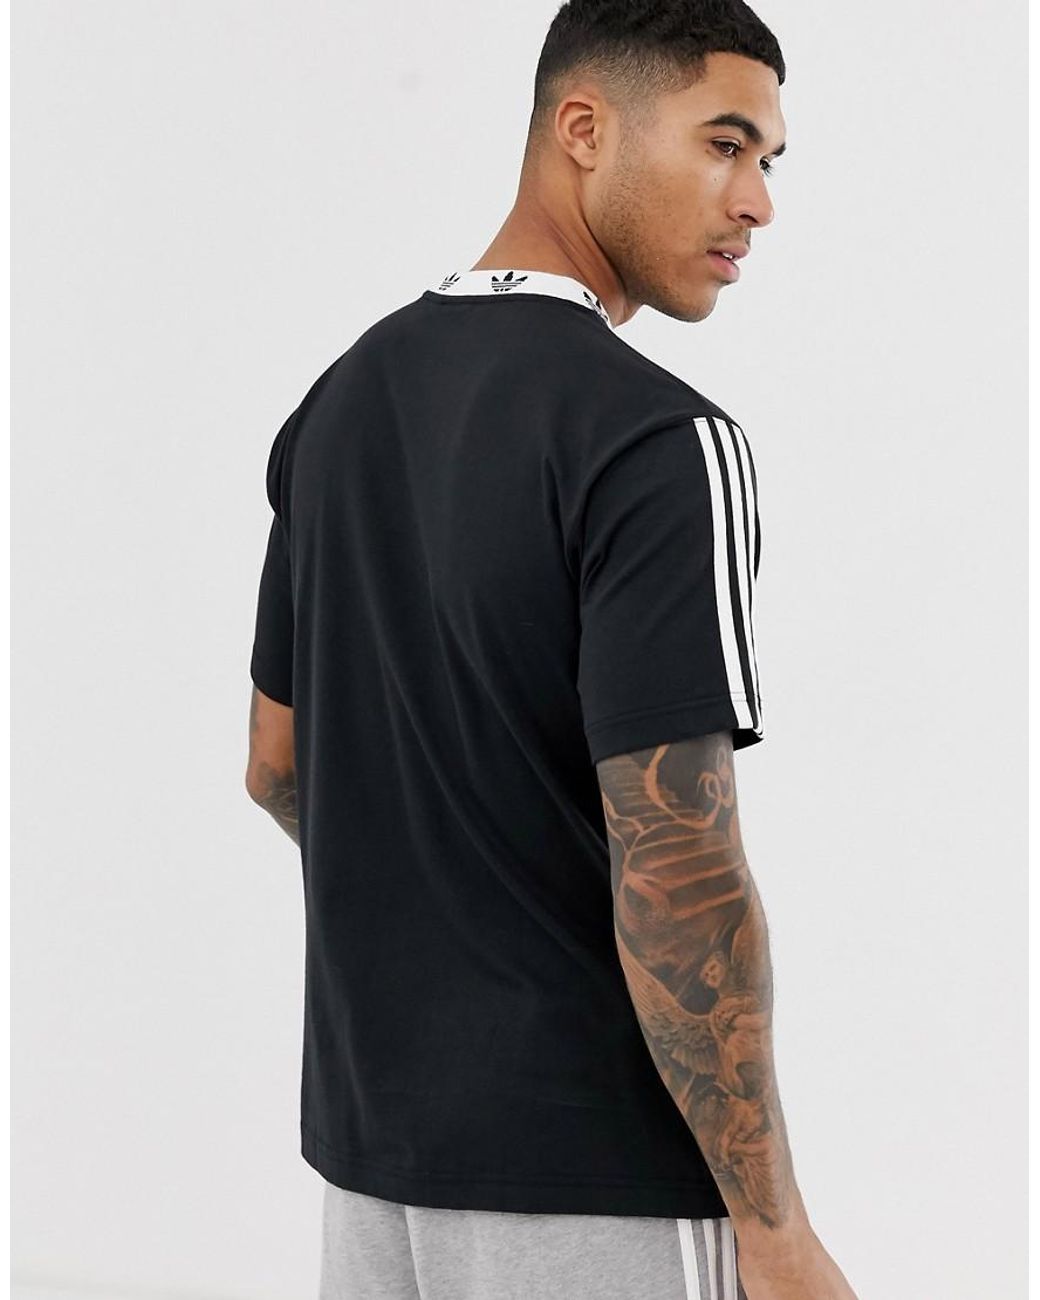 adidas Originals T-shirt With Trefoil Neck Print In for Men Lyst